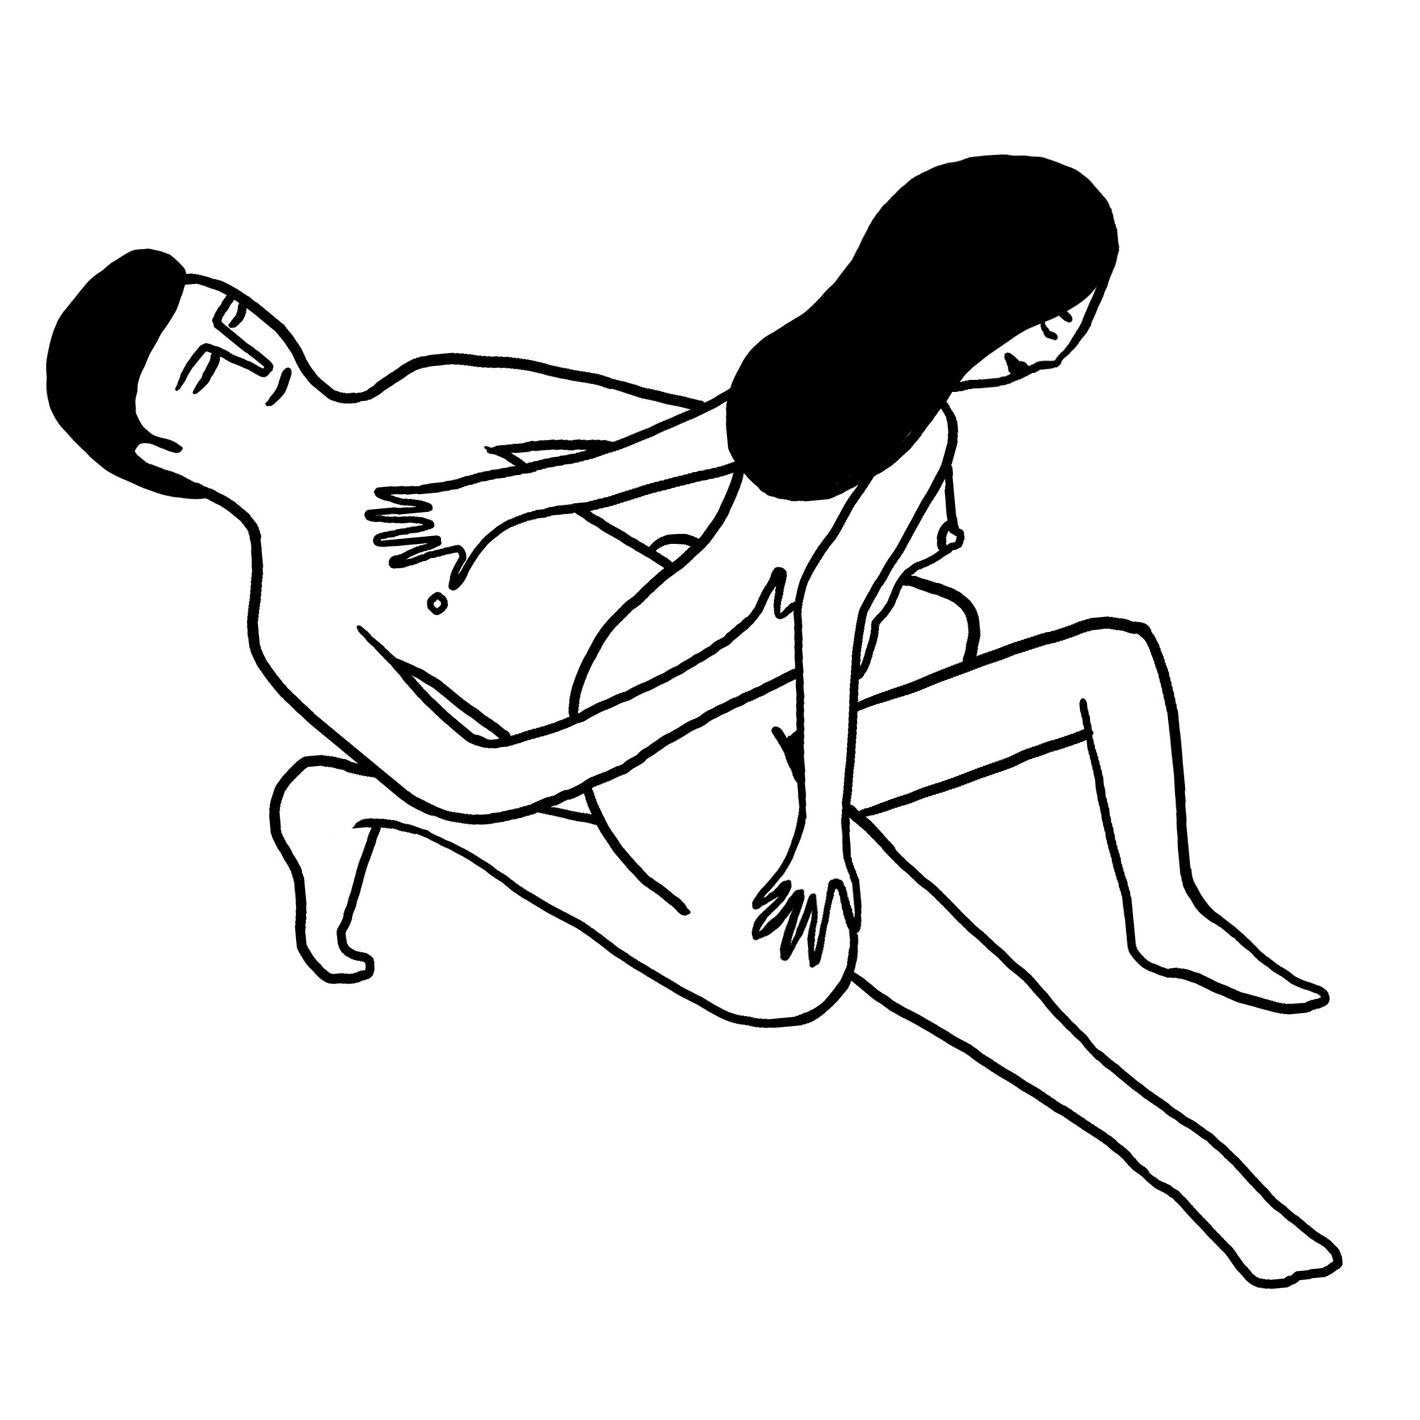 Sex position for a shower